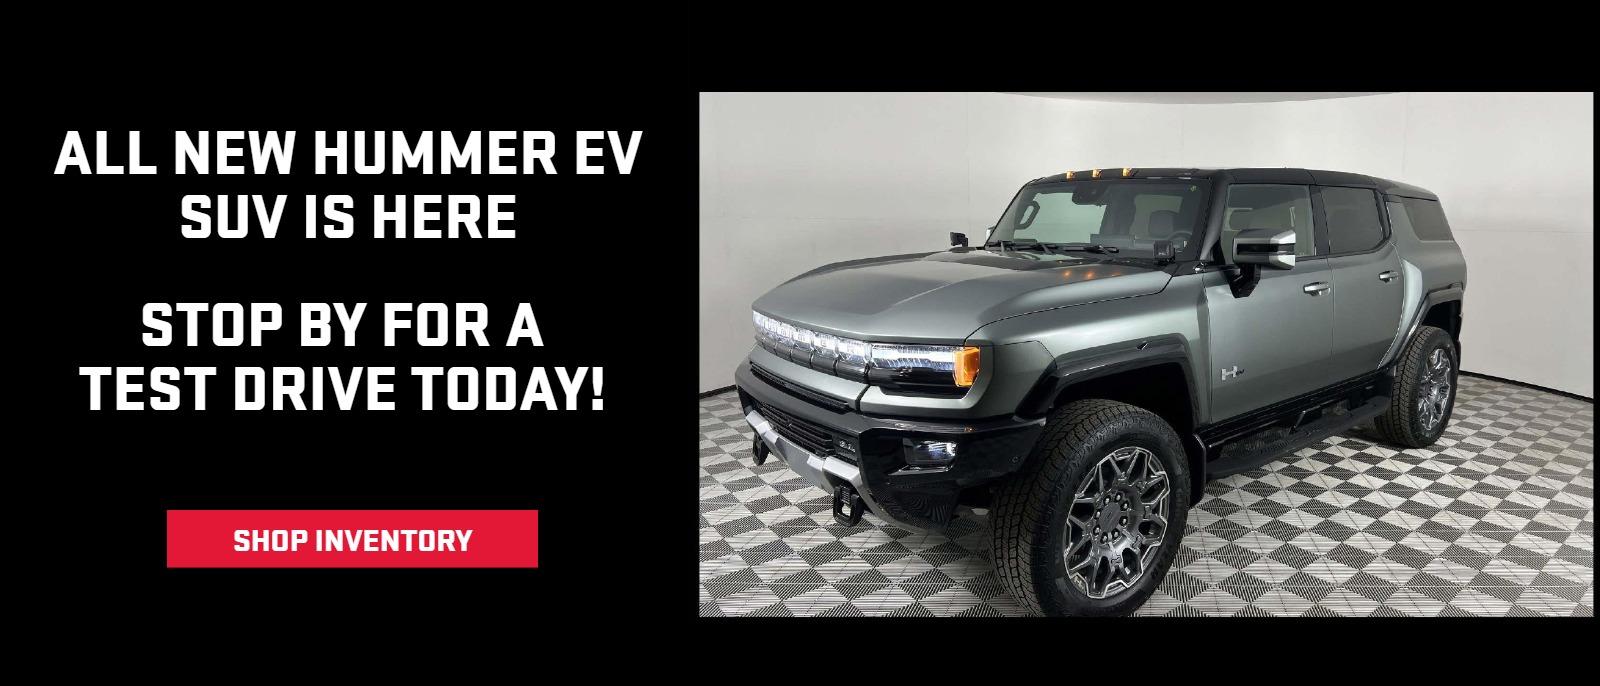 ALL NEW HUMMER EV SUV IS HERE
STOP BY FOR A
TEST DRIVE TODAY!